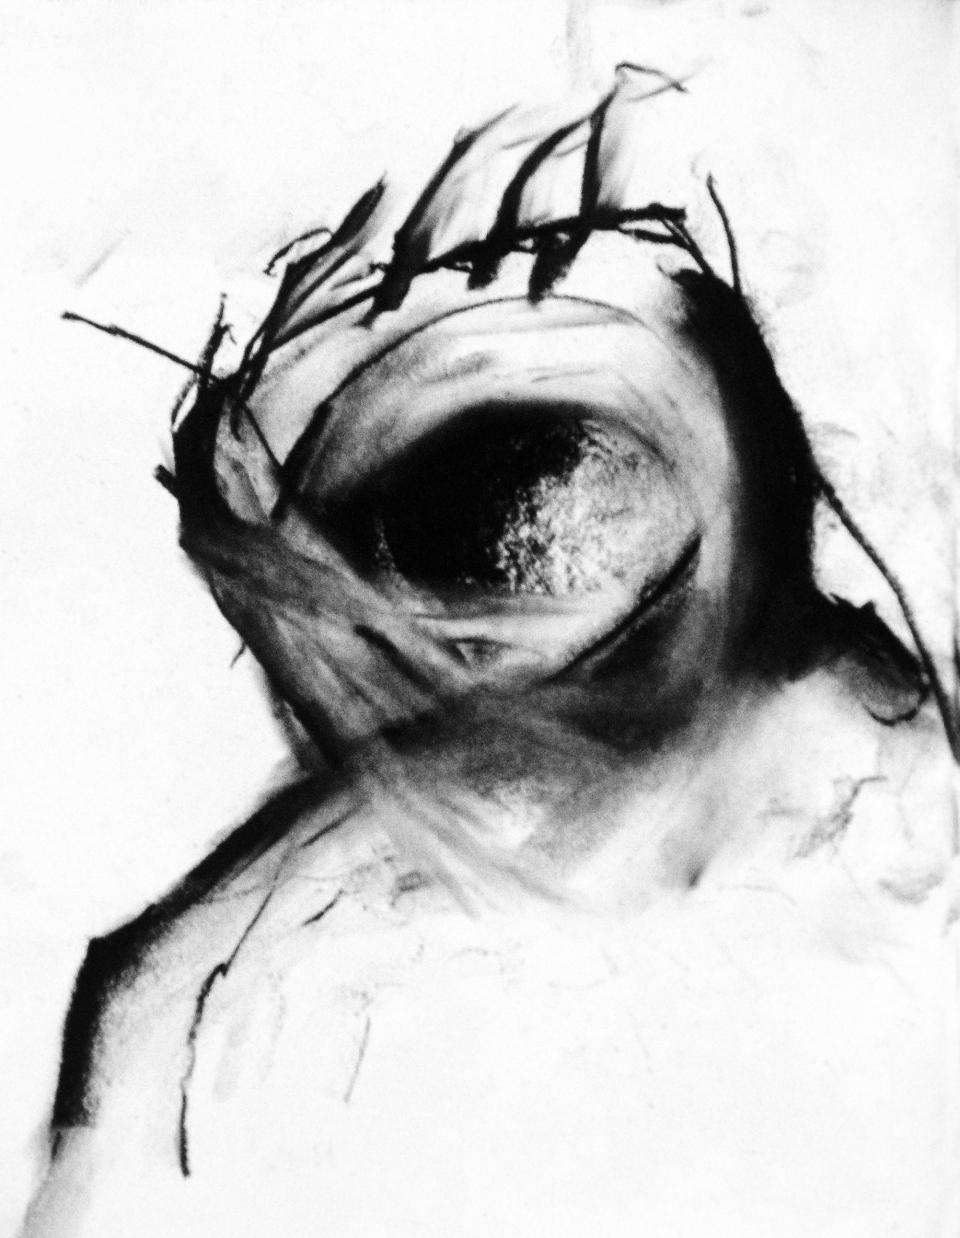 the Eye 1985  charcoal on paper  18 x 23   SOLD 